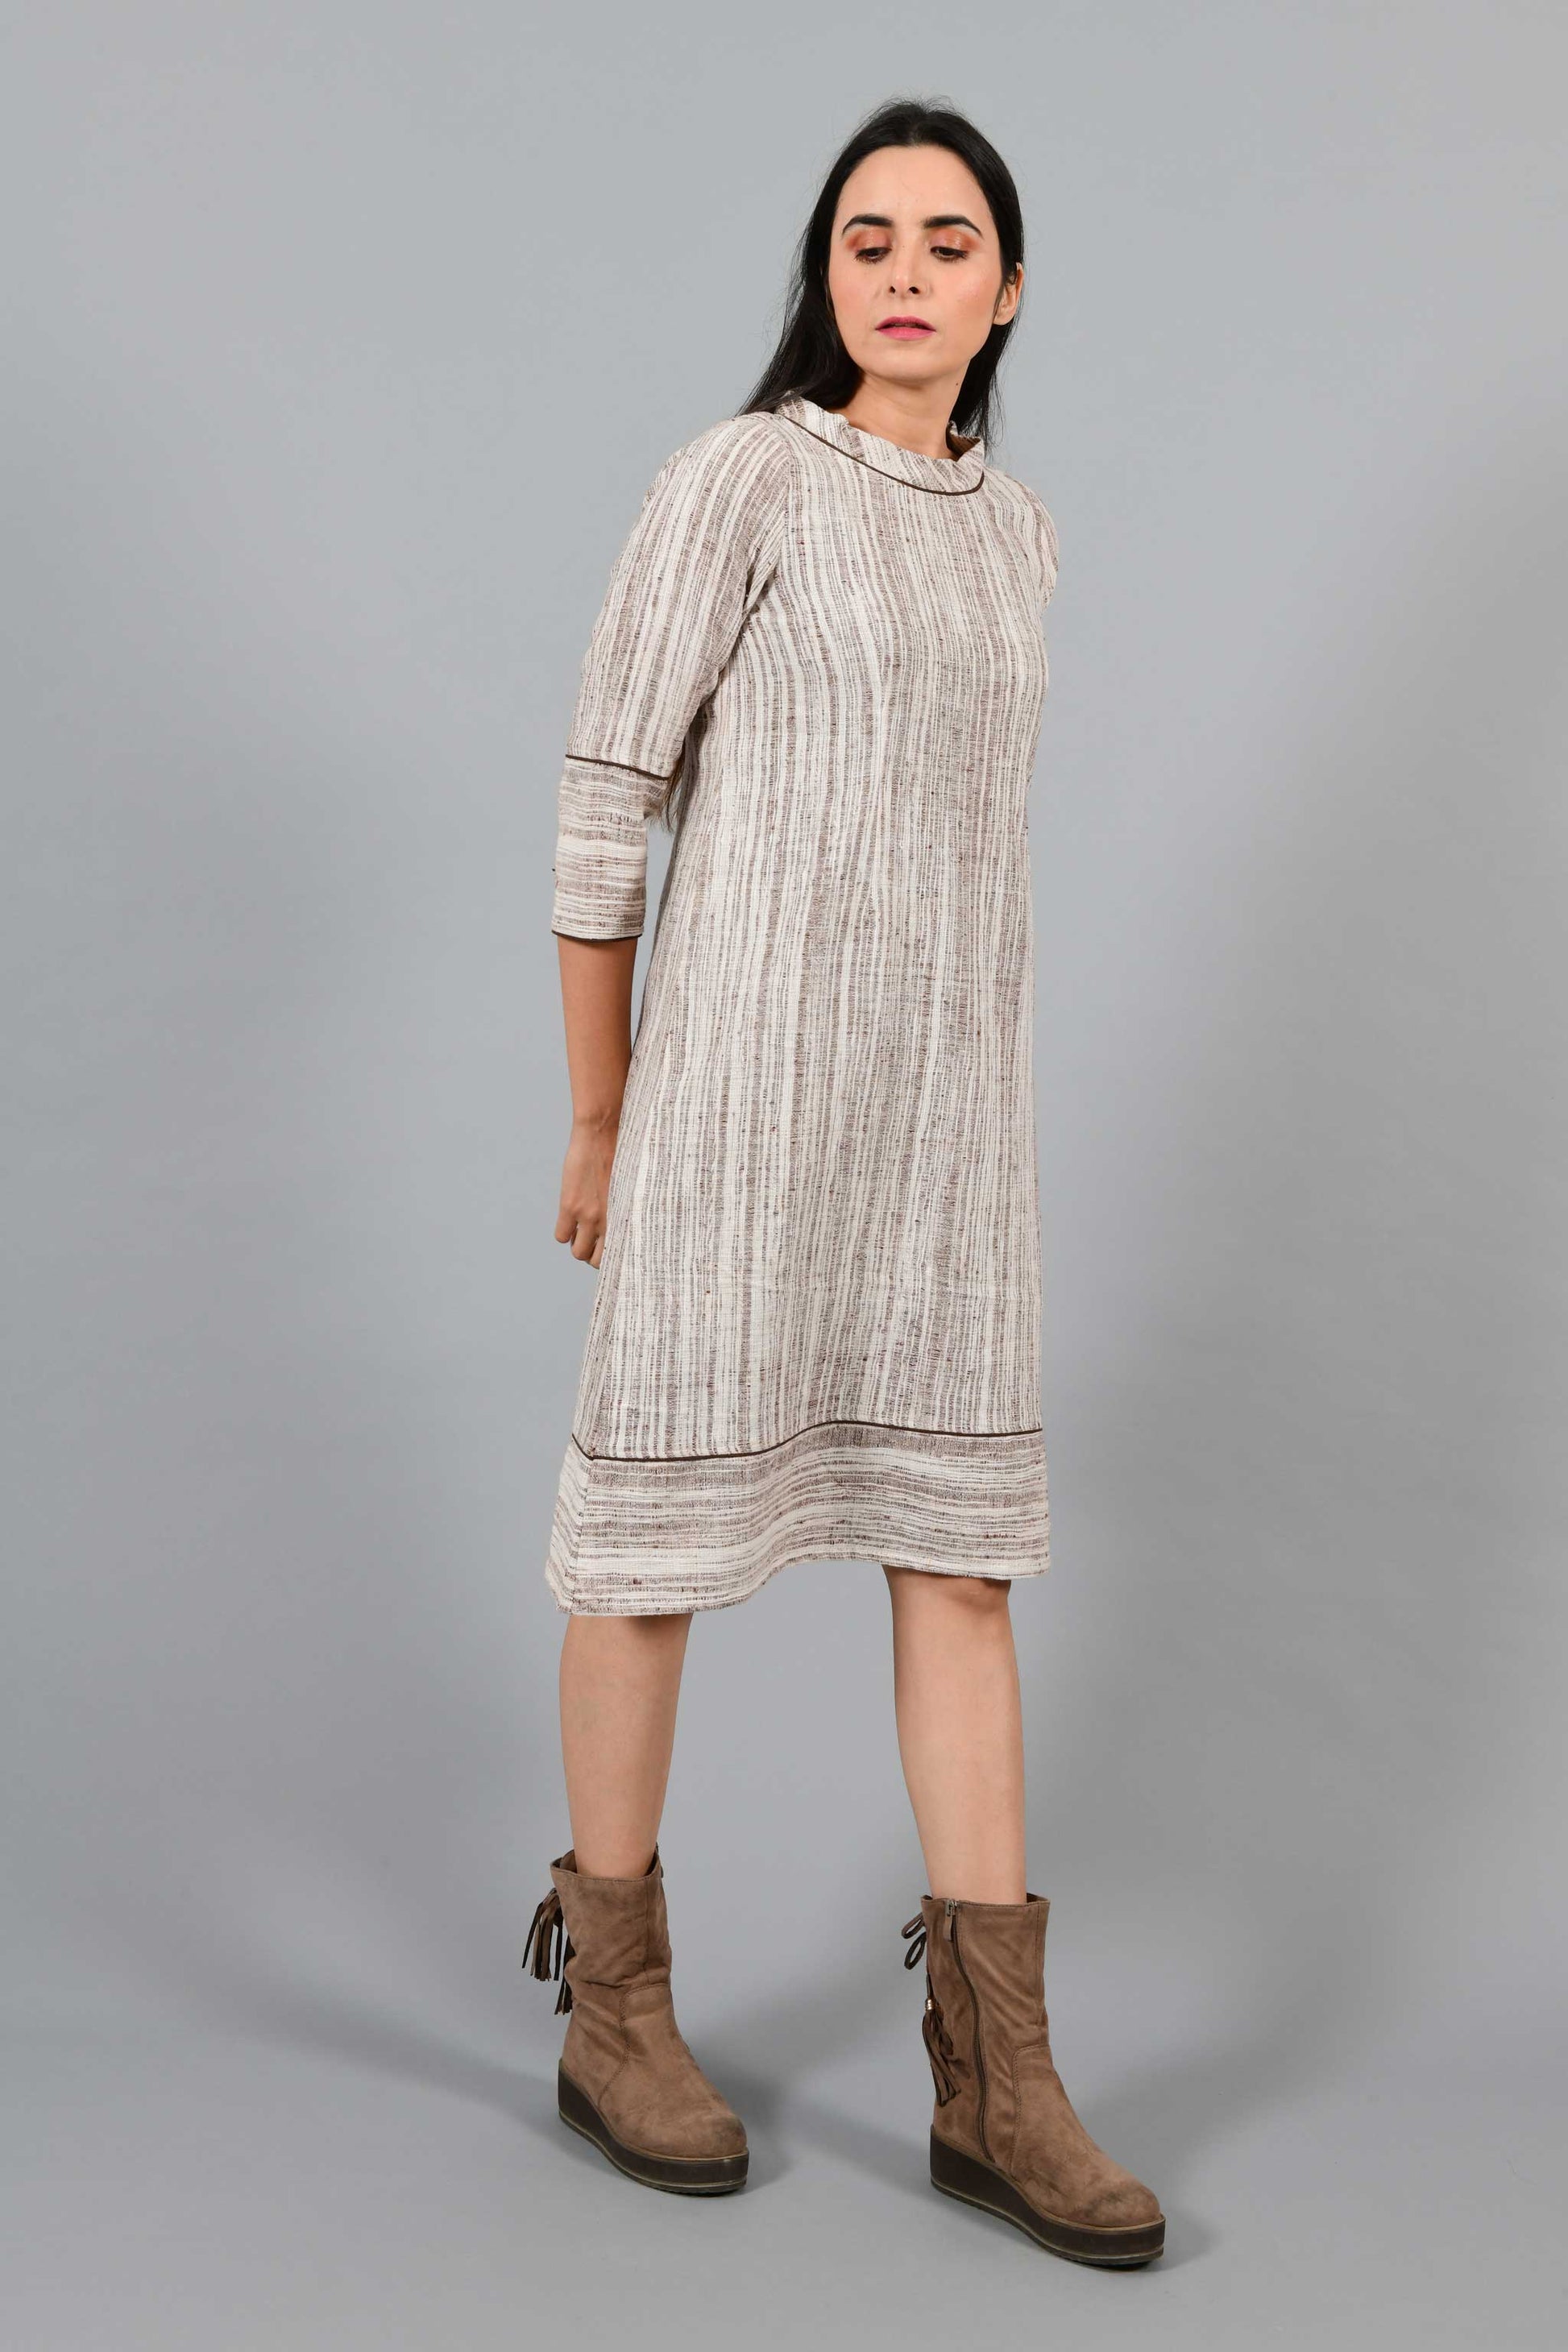 Side walking pose of an Indian Womenswear female model wearing brown handspun and handwoven cotton a-line dress by Cotton Rack.